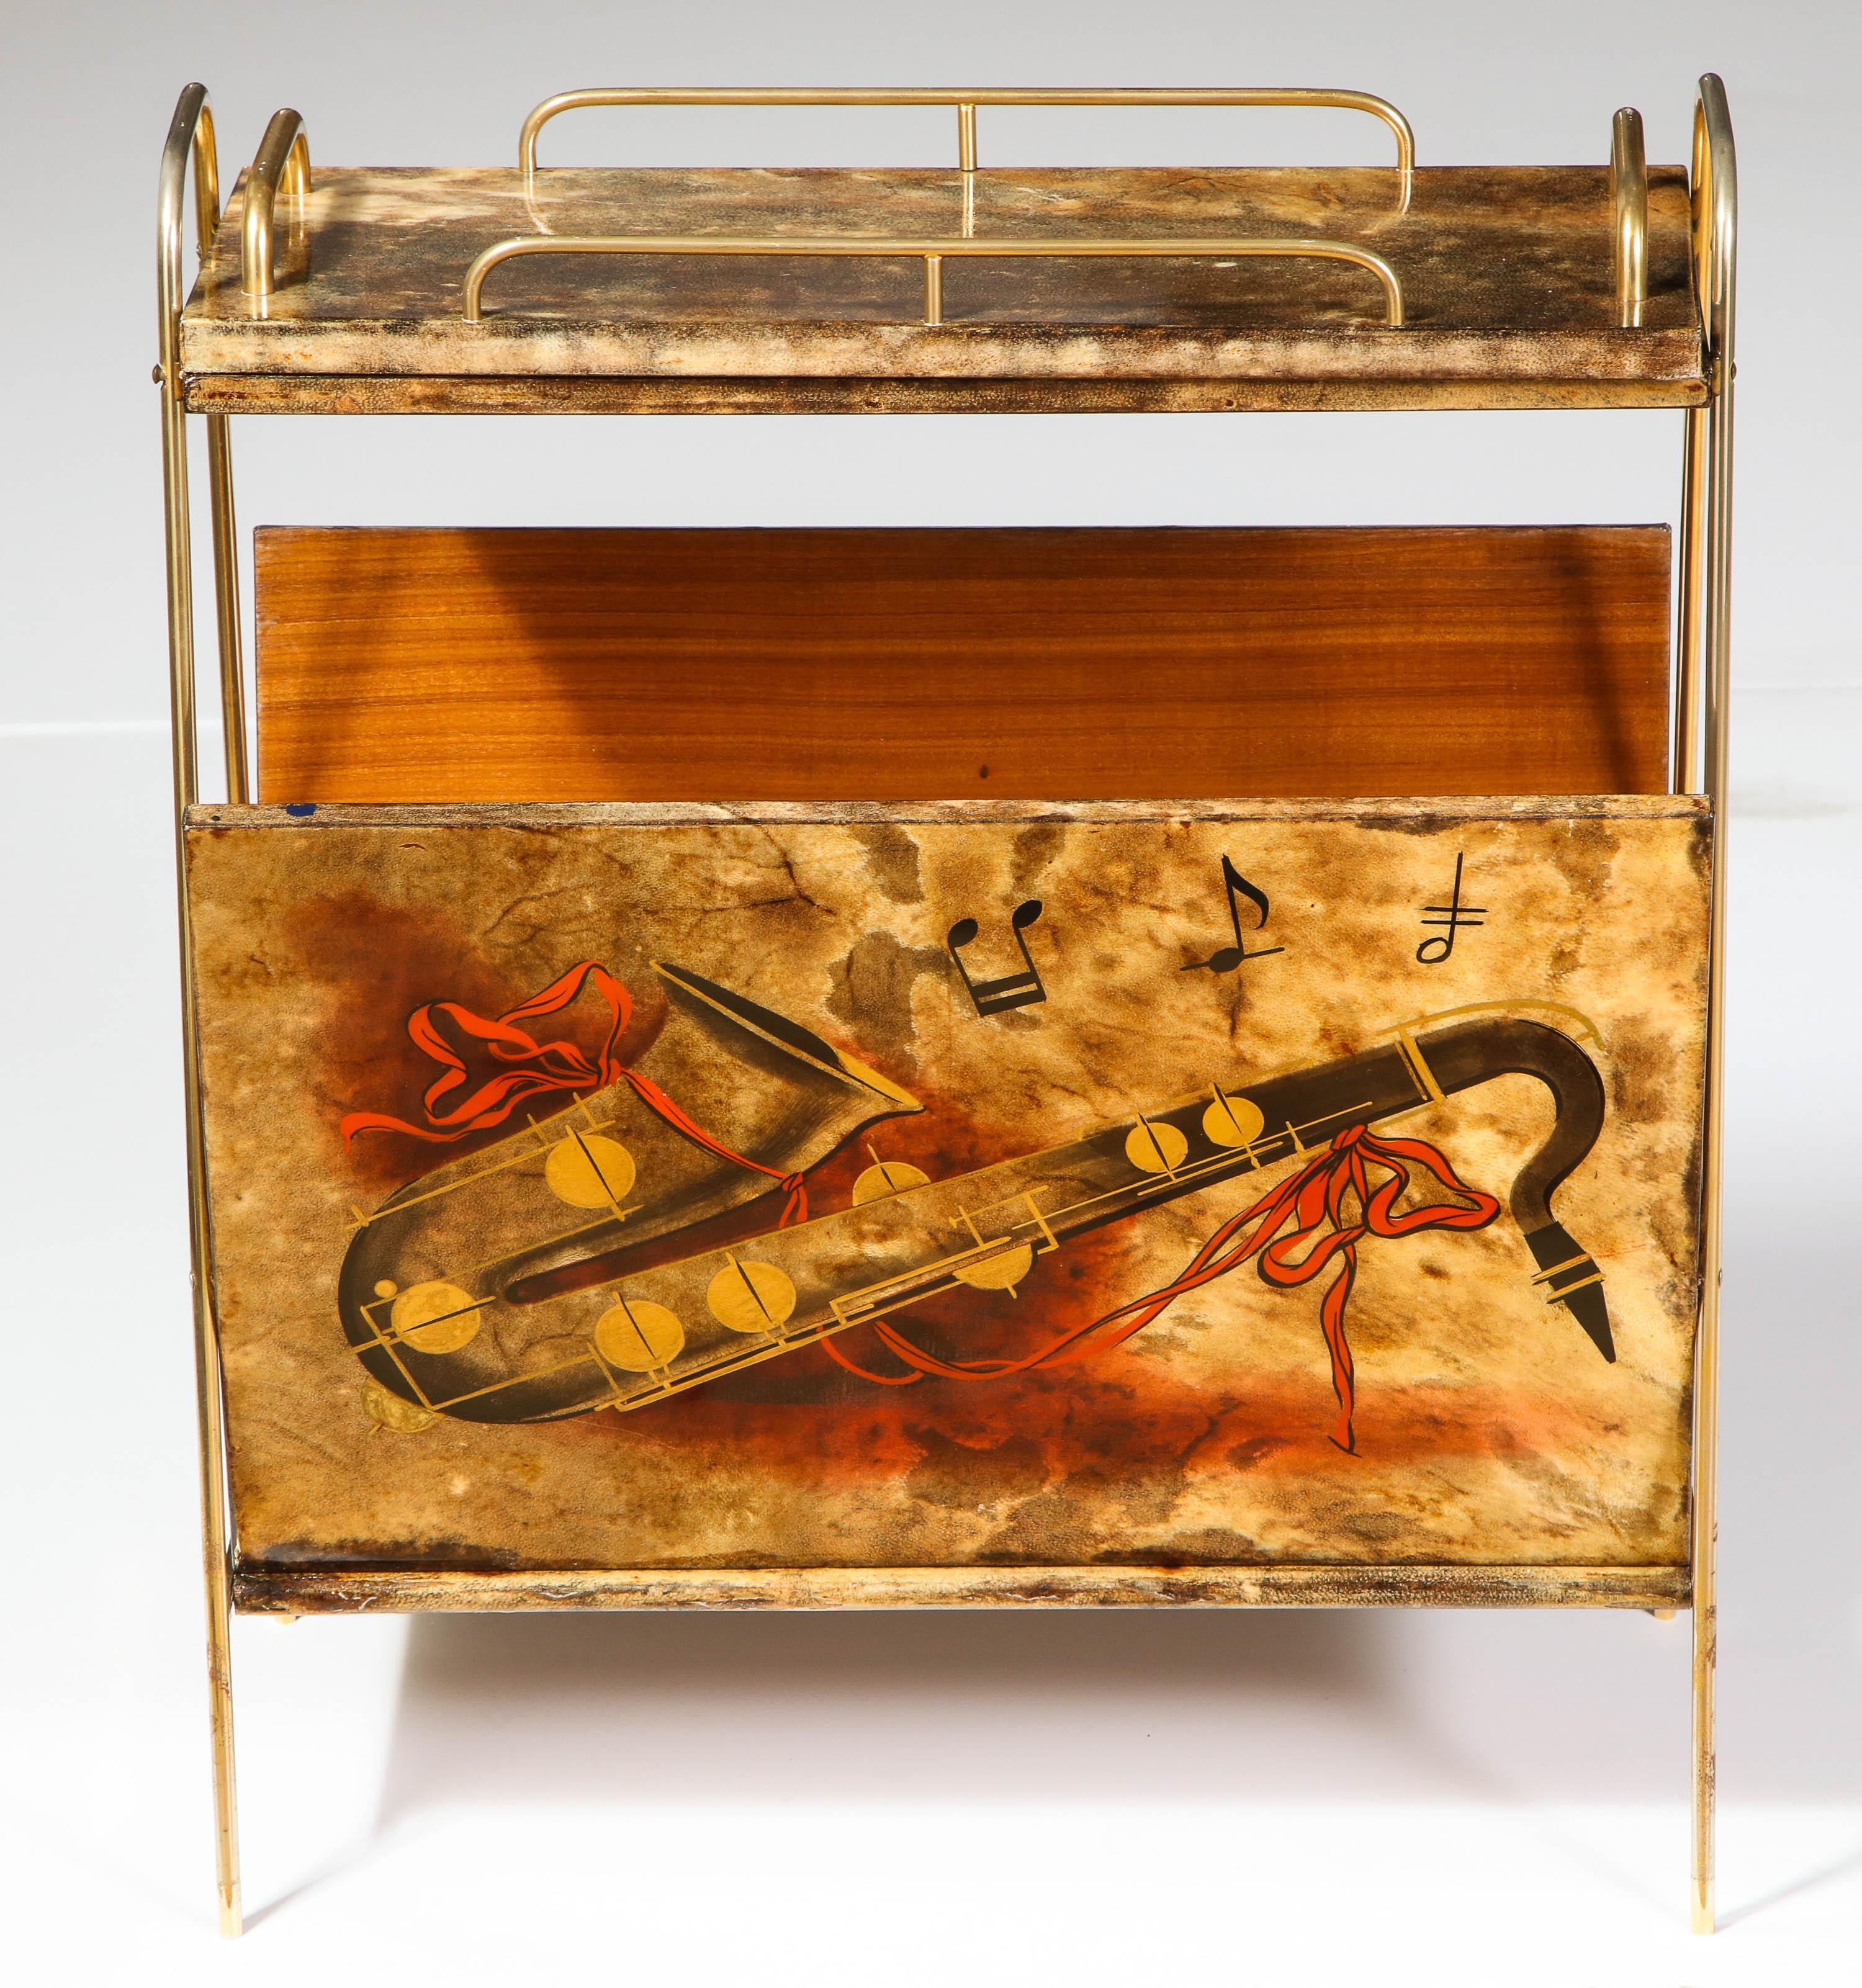 A very unusual magazine stand by Aldo Tura, Italy, midcentury, circa 1950, for sheet music.
Wood covered by goat skin parchment. The magazine stand has beautiful paintings on each side with musical instruments. Handles and legs are made of brass.